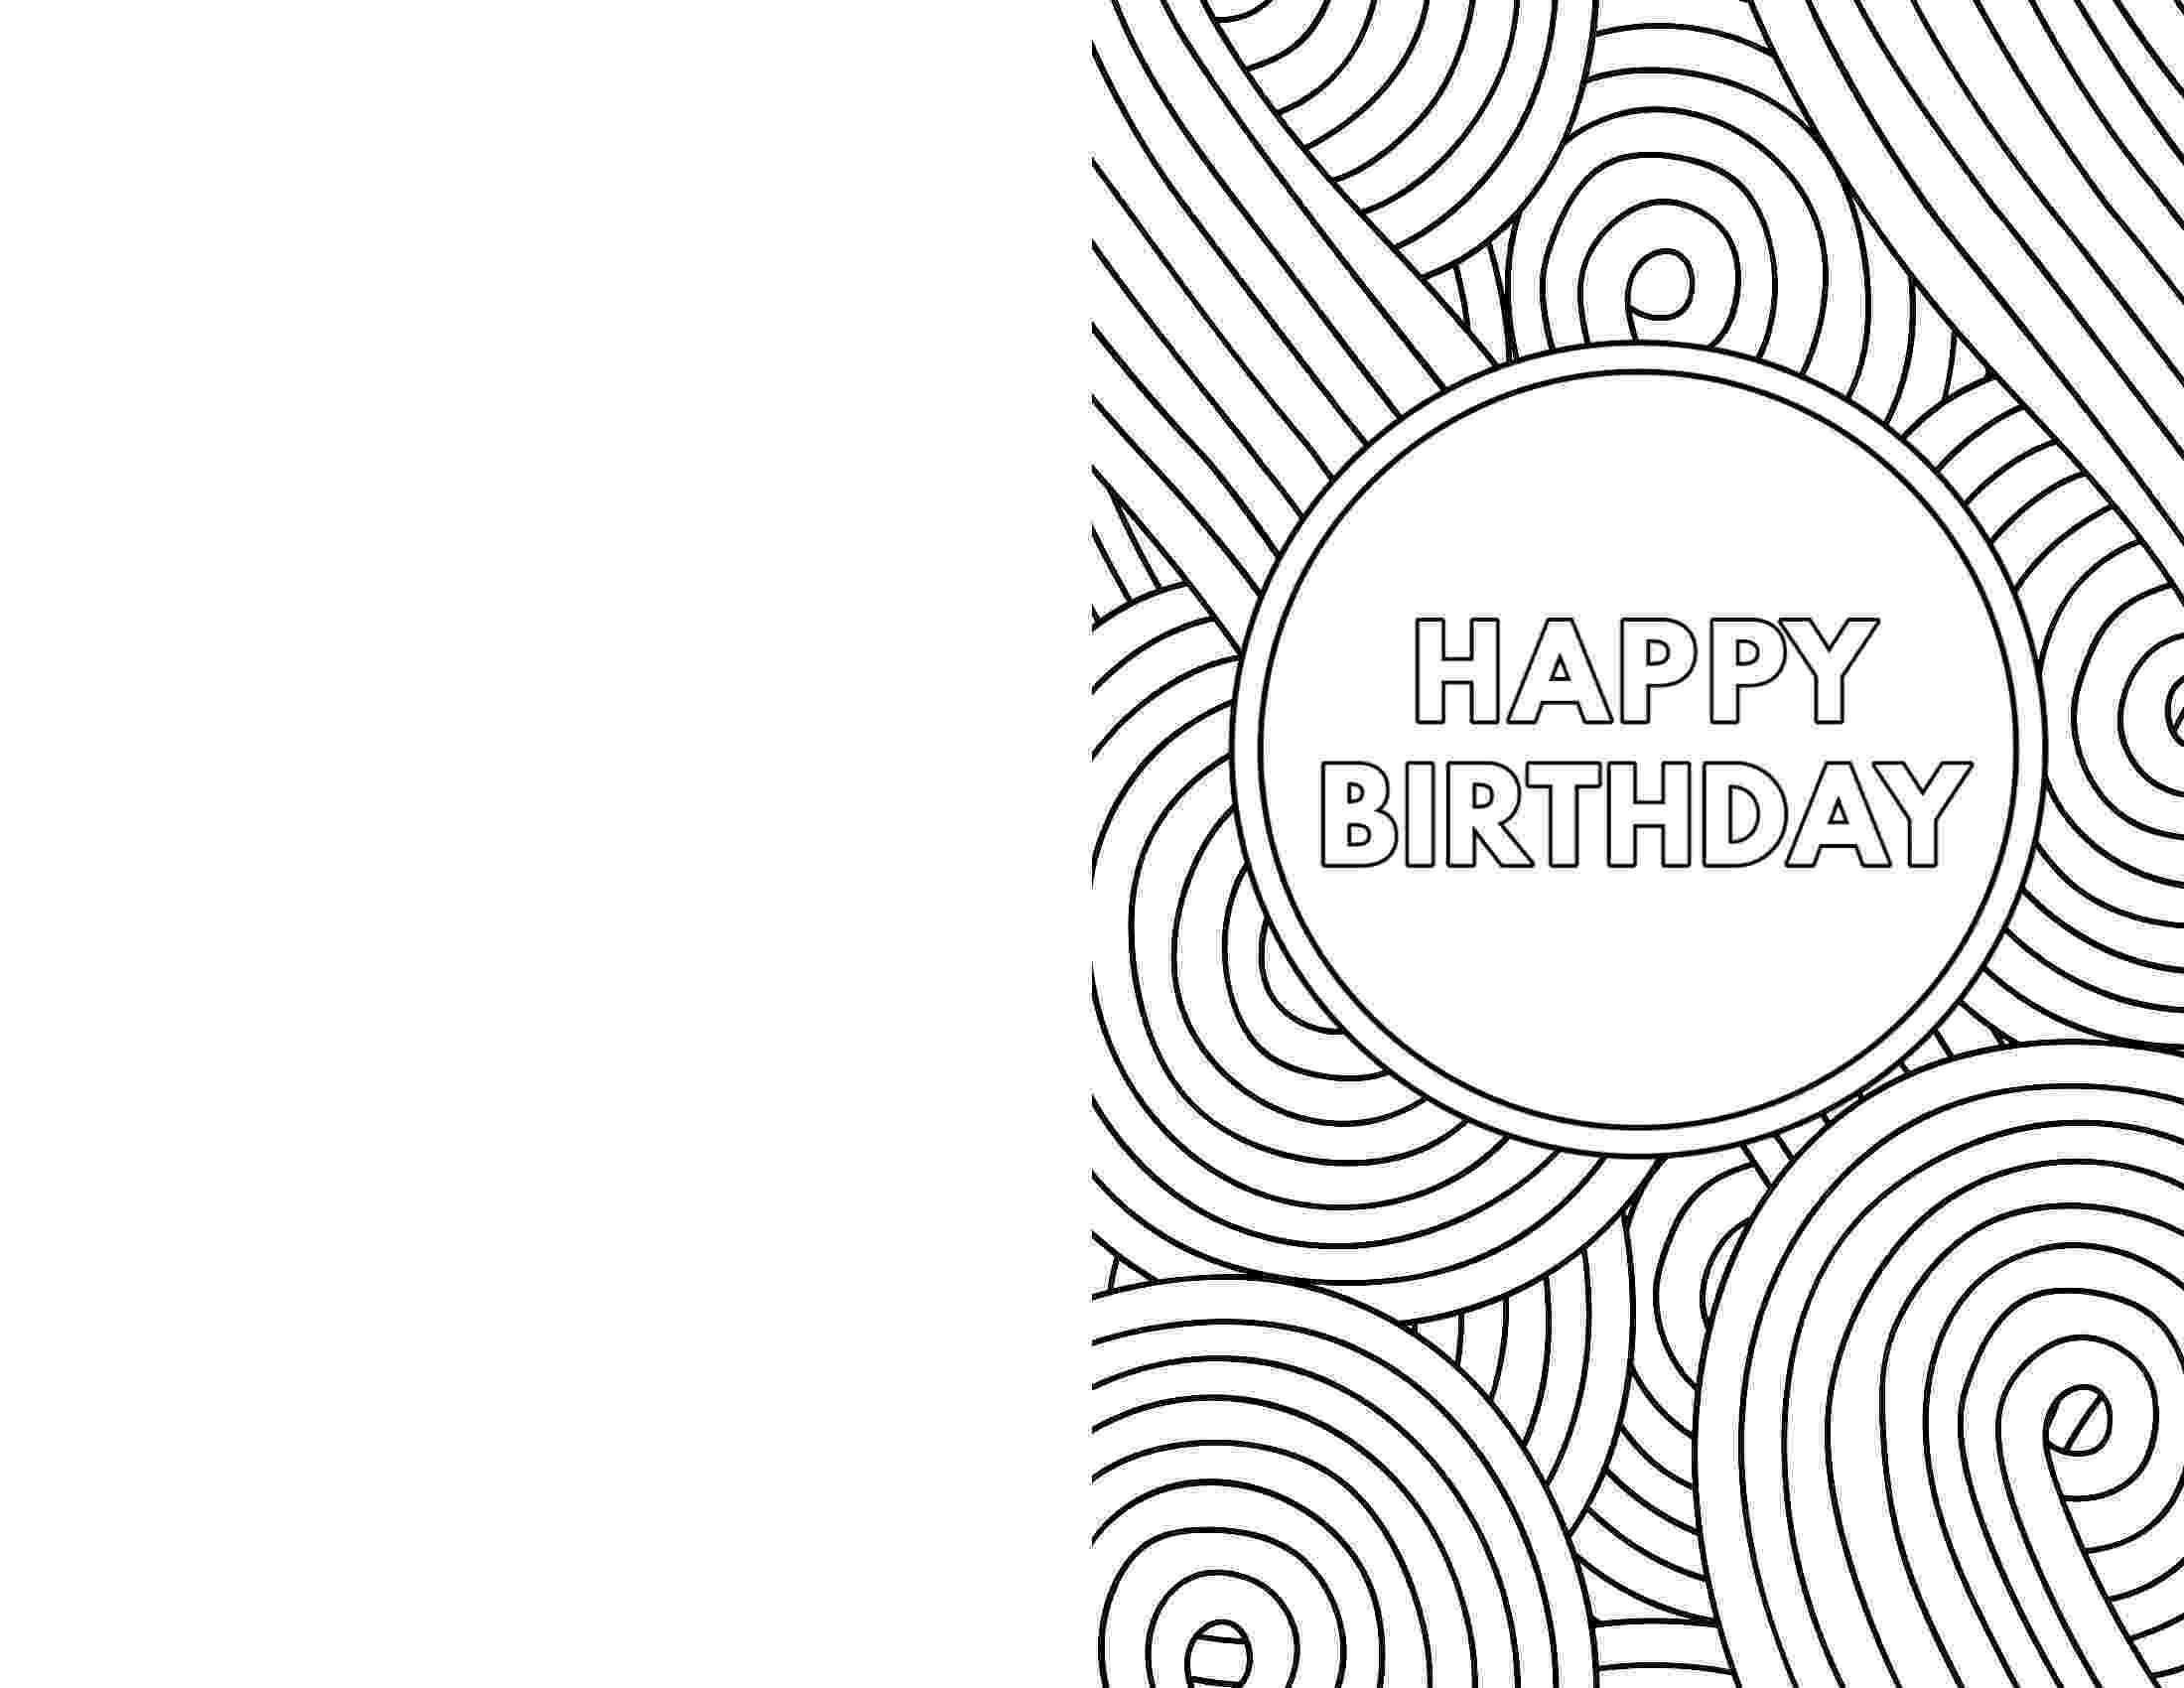 happy birthday printable 17 best images about coloring book pages on pinterest happy printable birthday 